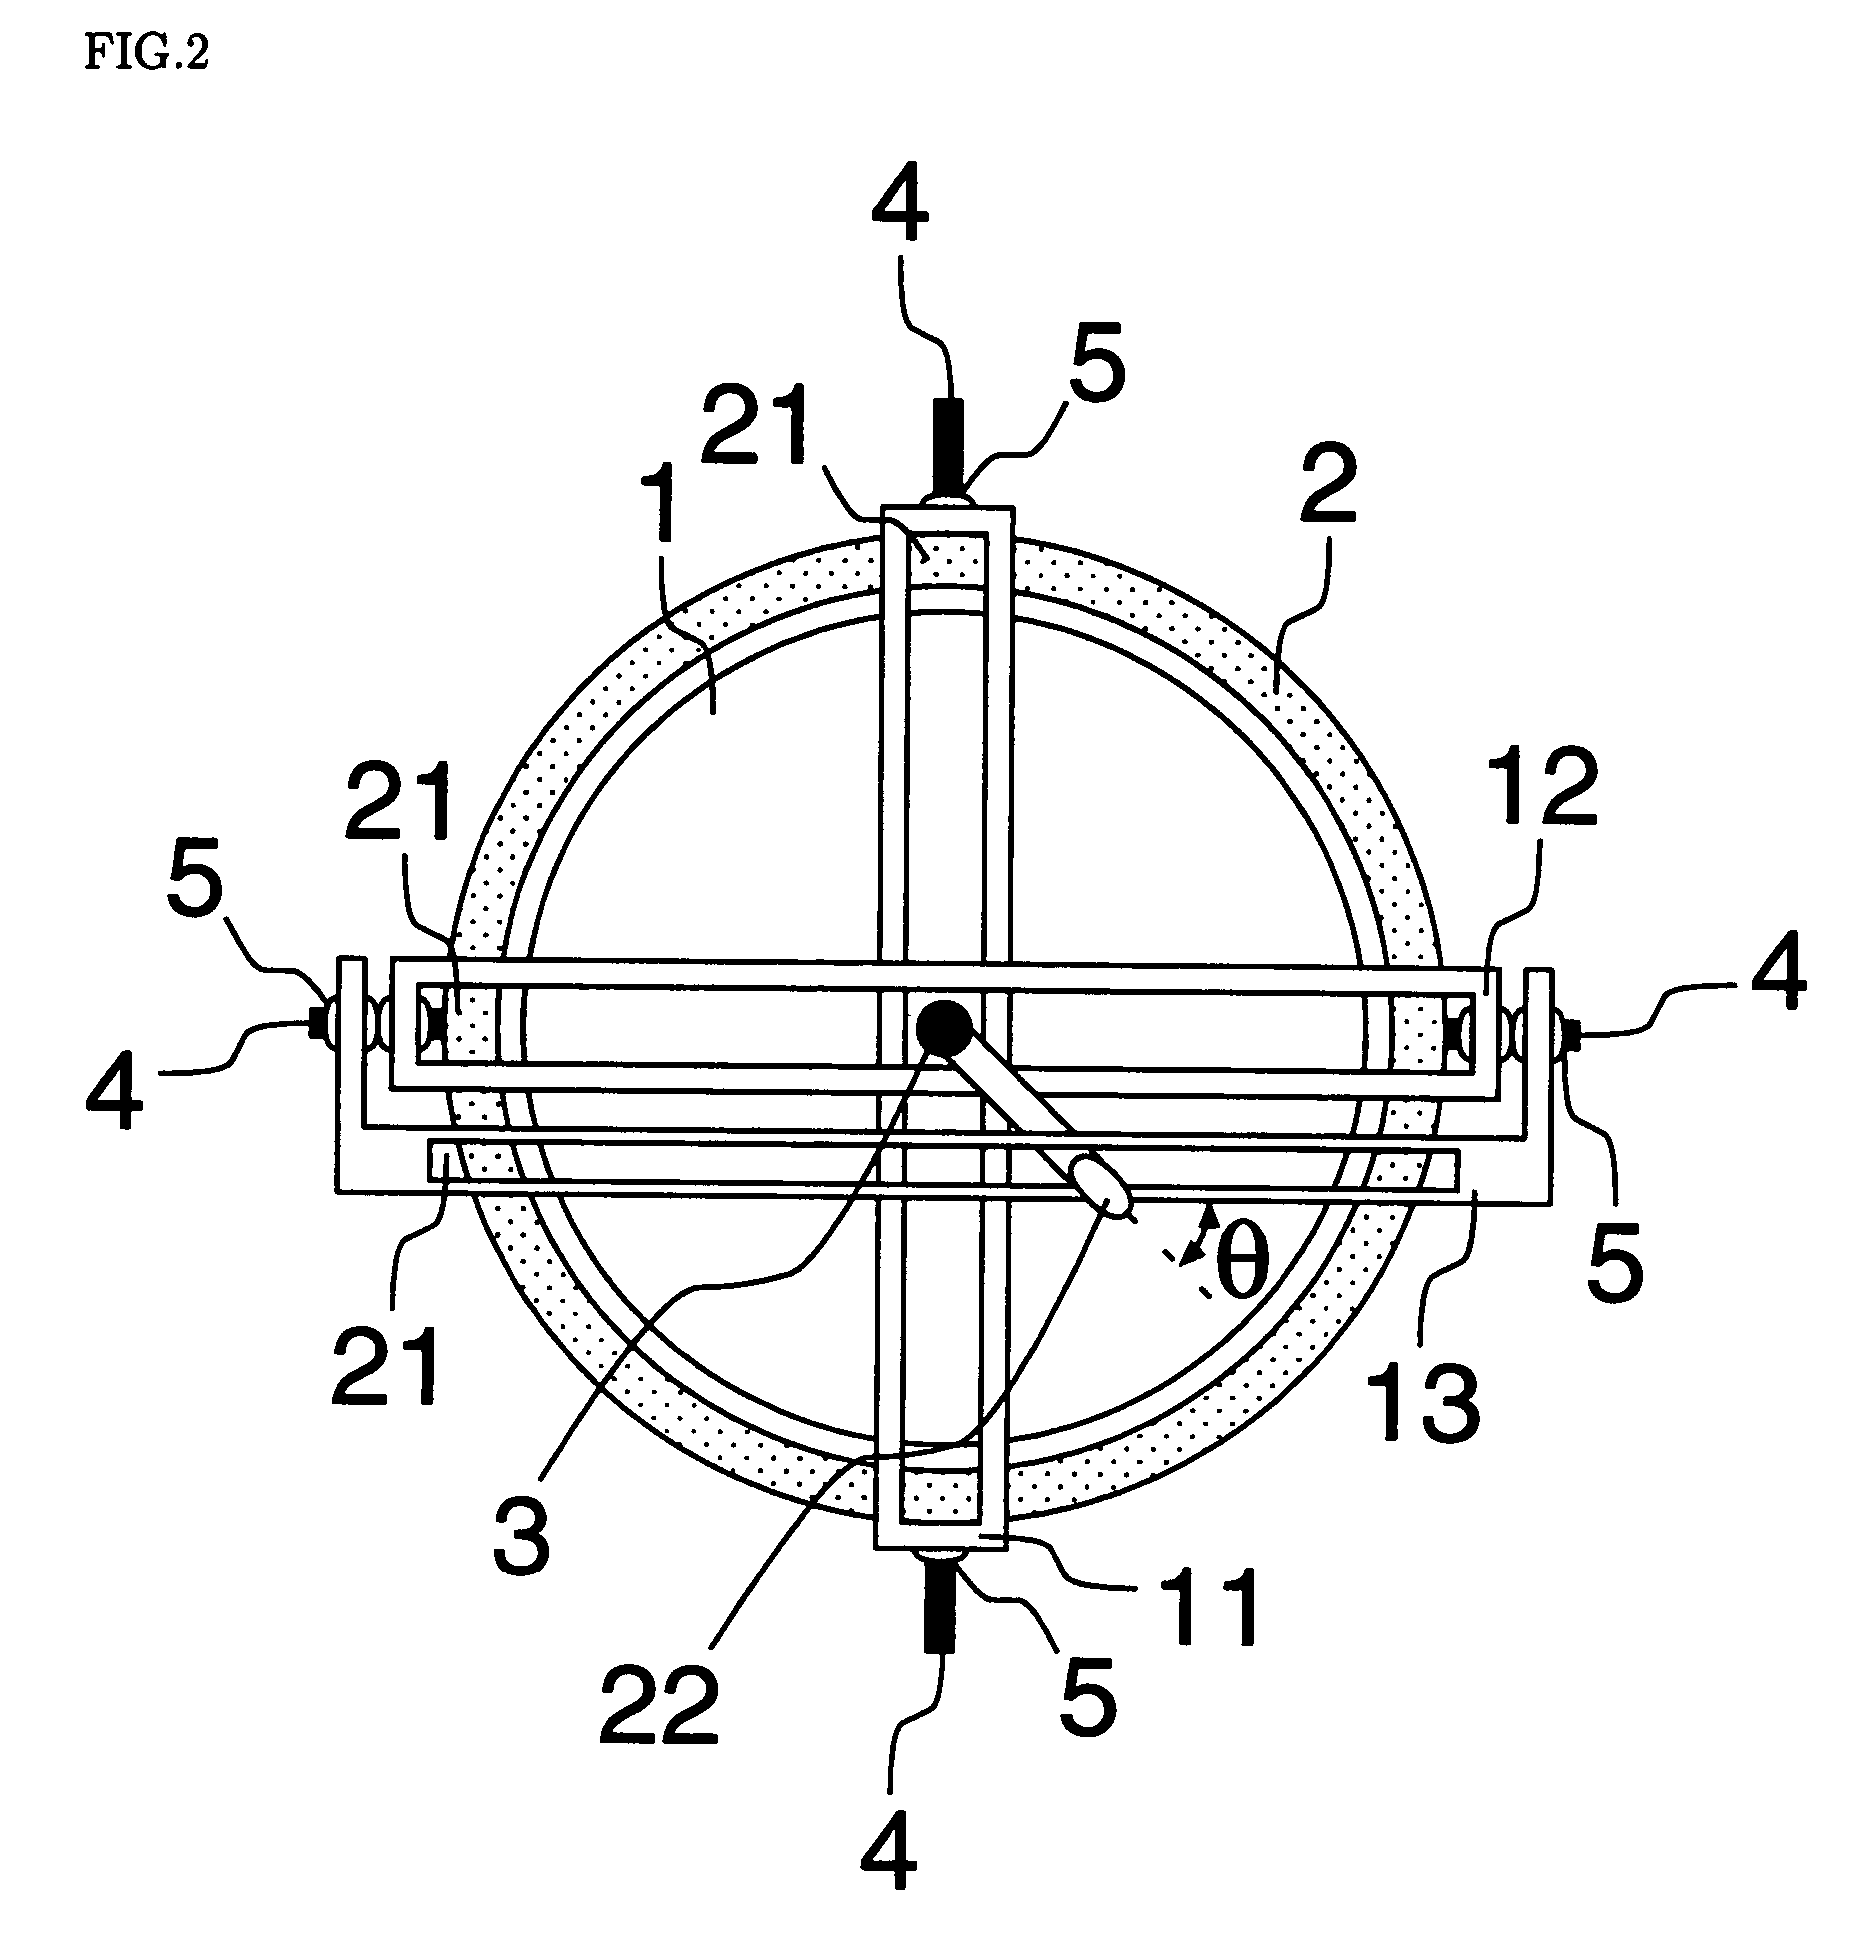 Rotation system with three degrees of freedom and application of the same